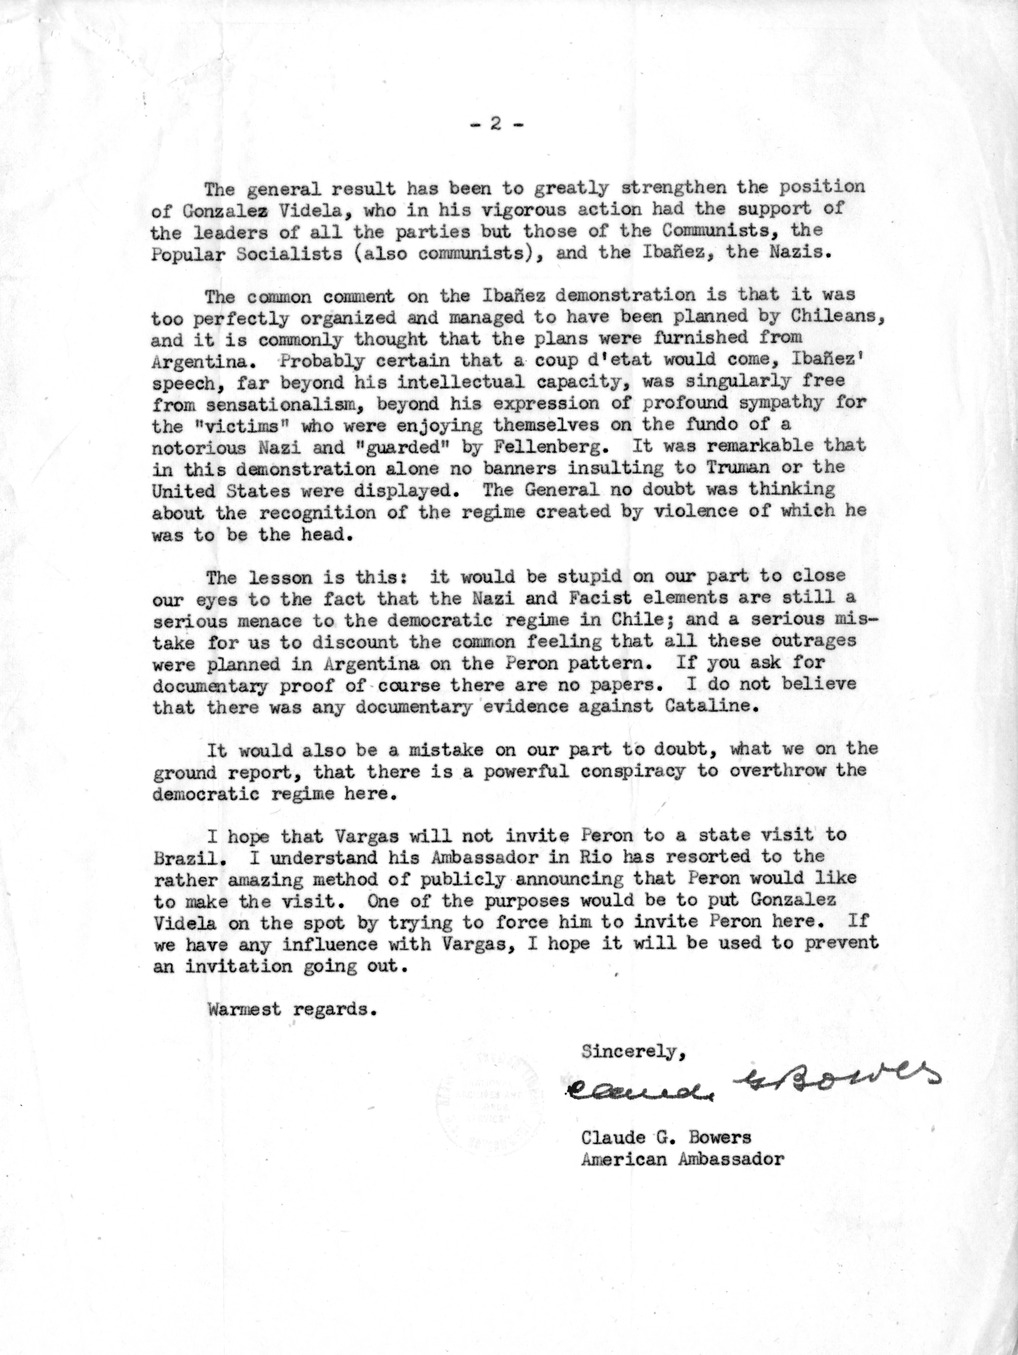 Note from Ambassador Claude Bowers to President Harry S. Truman, with Attachment